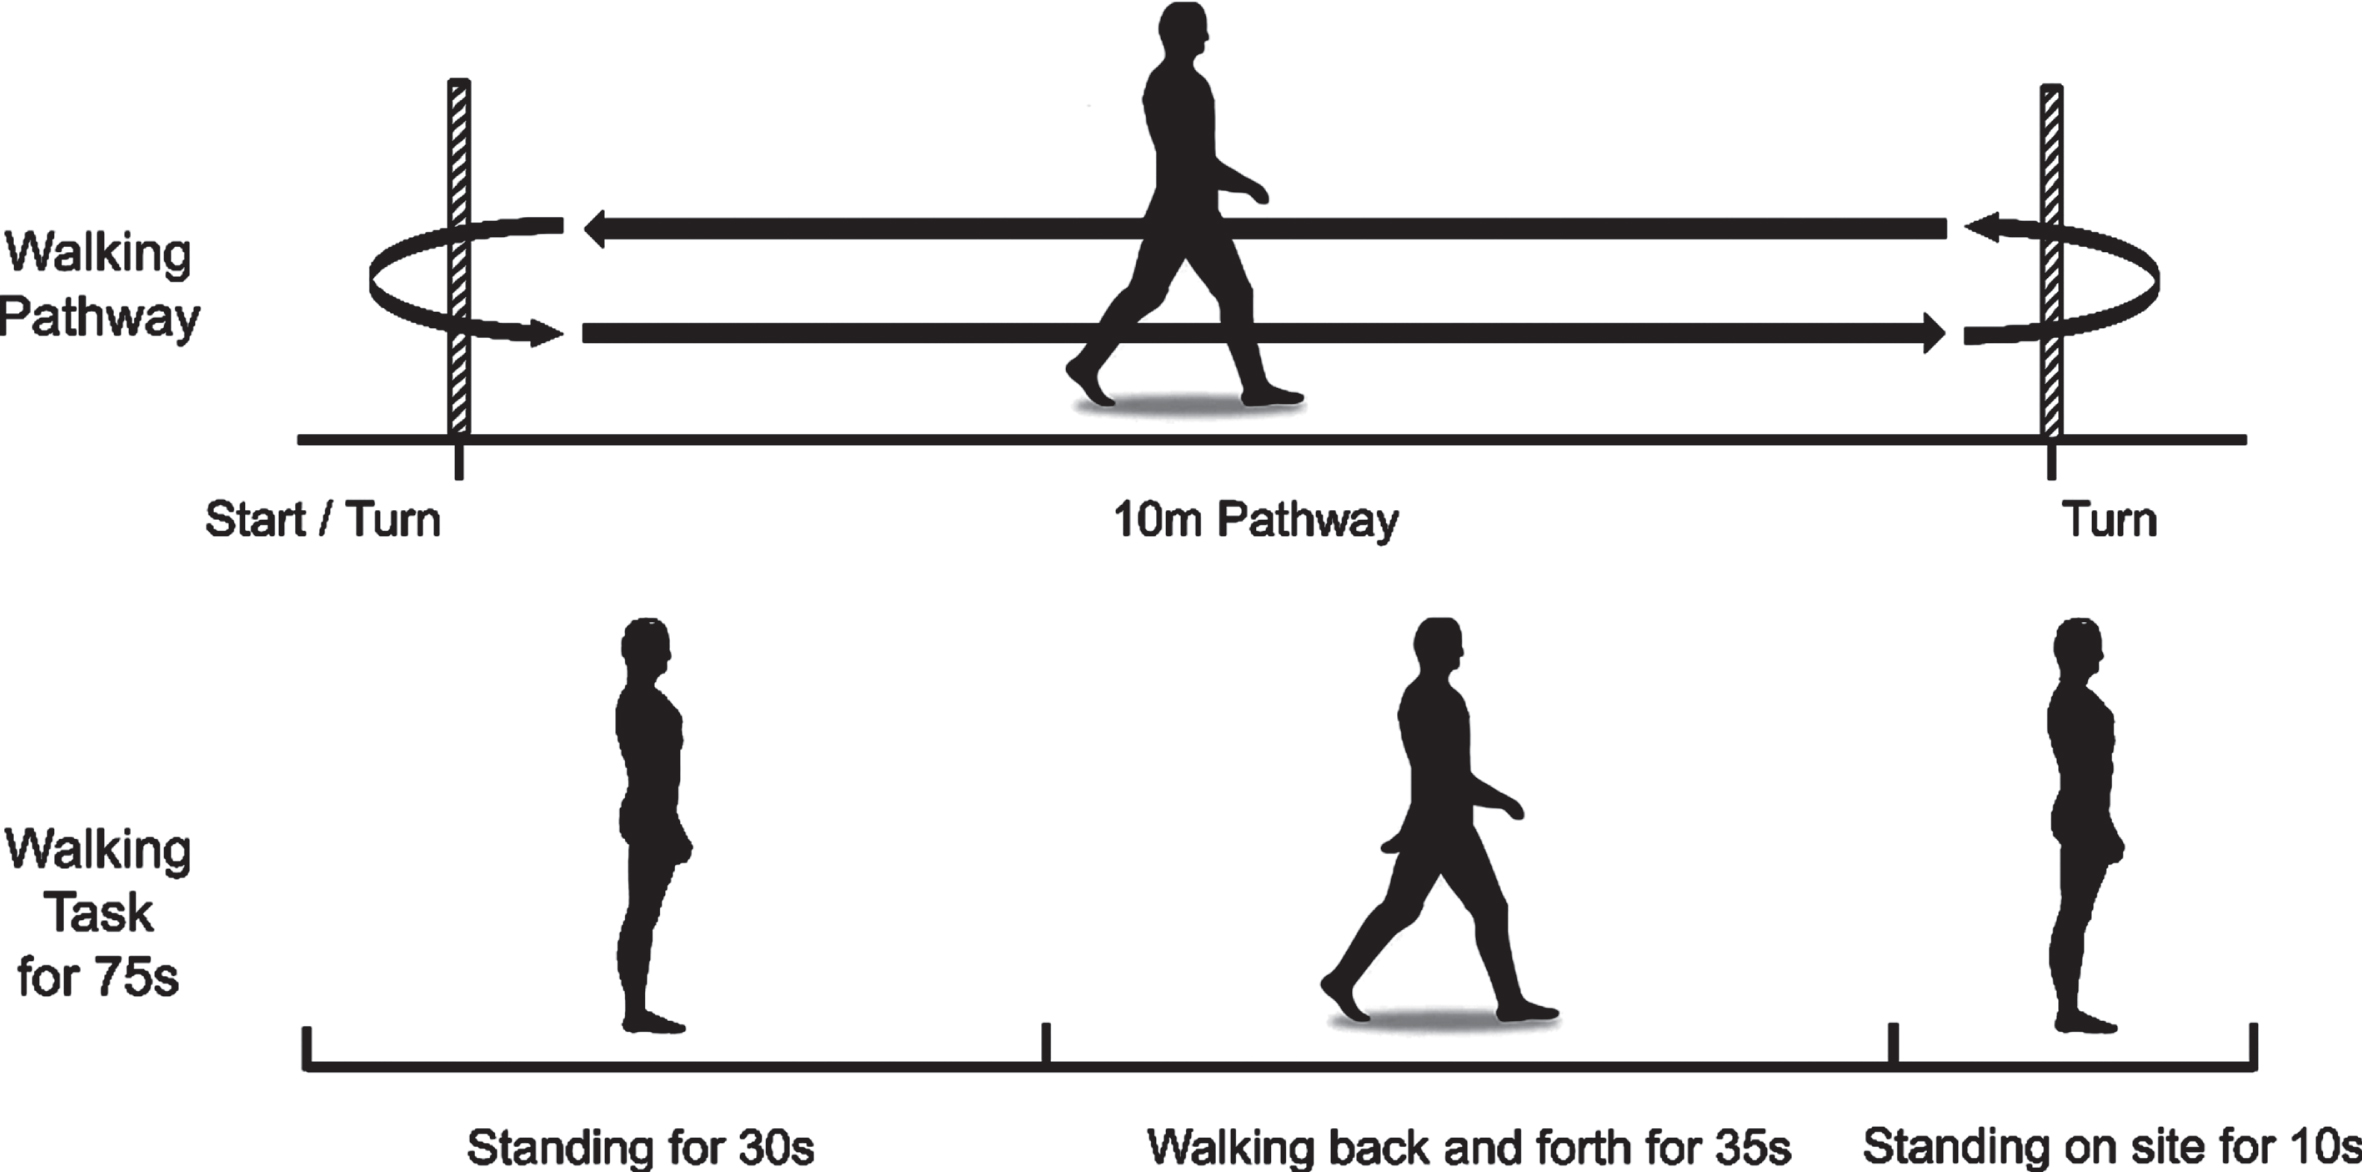 Experimental paradigm. Walking at a usual and relaxed speed on a 10-m footpath. Each trial started with standing for 30 s, followed by walking for 35 s, and stopped by standing on site for 10 s. The participants performed the same walking test three times.